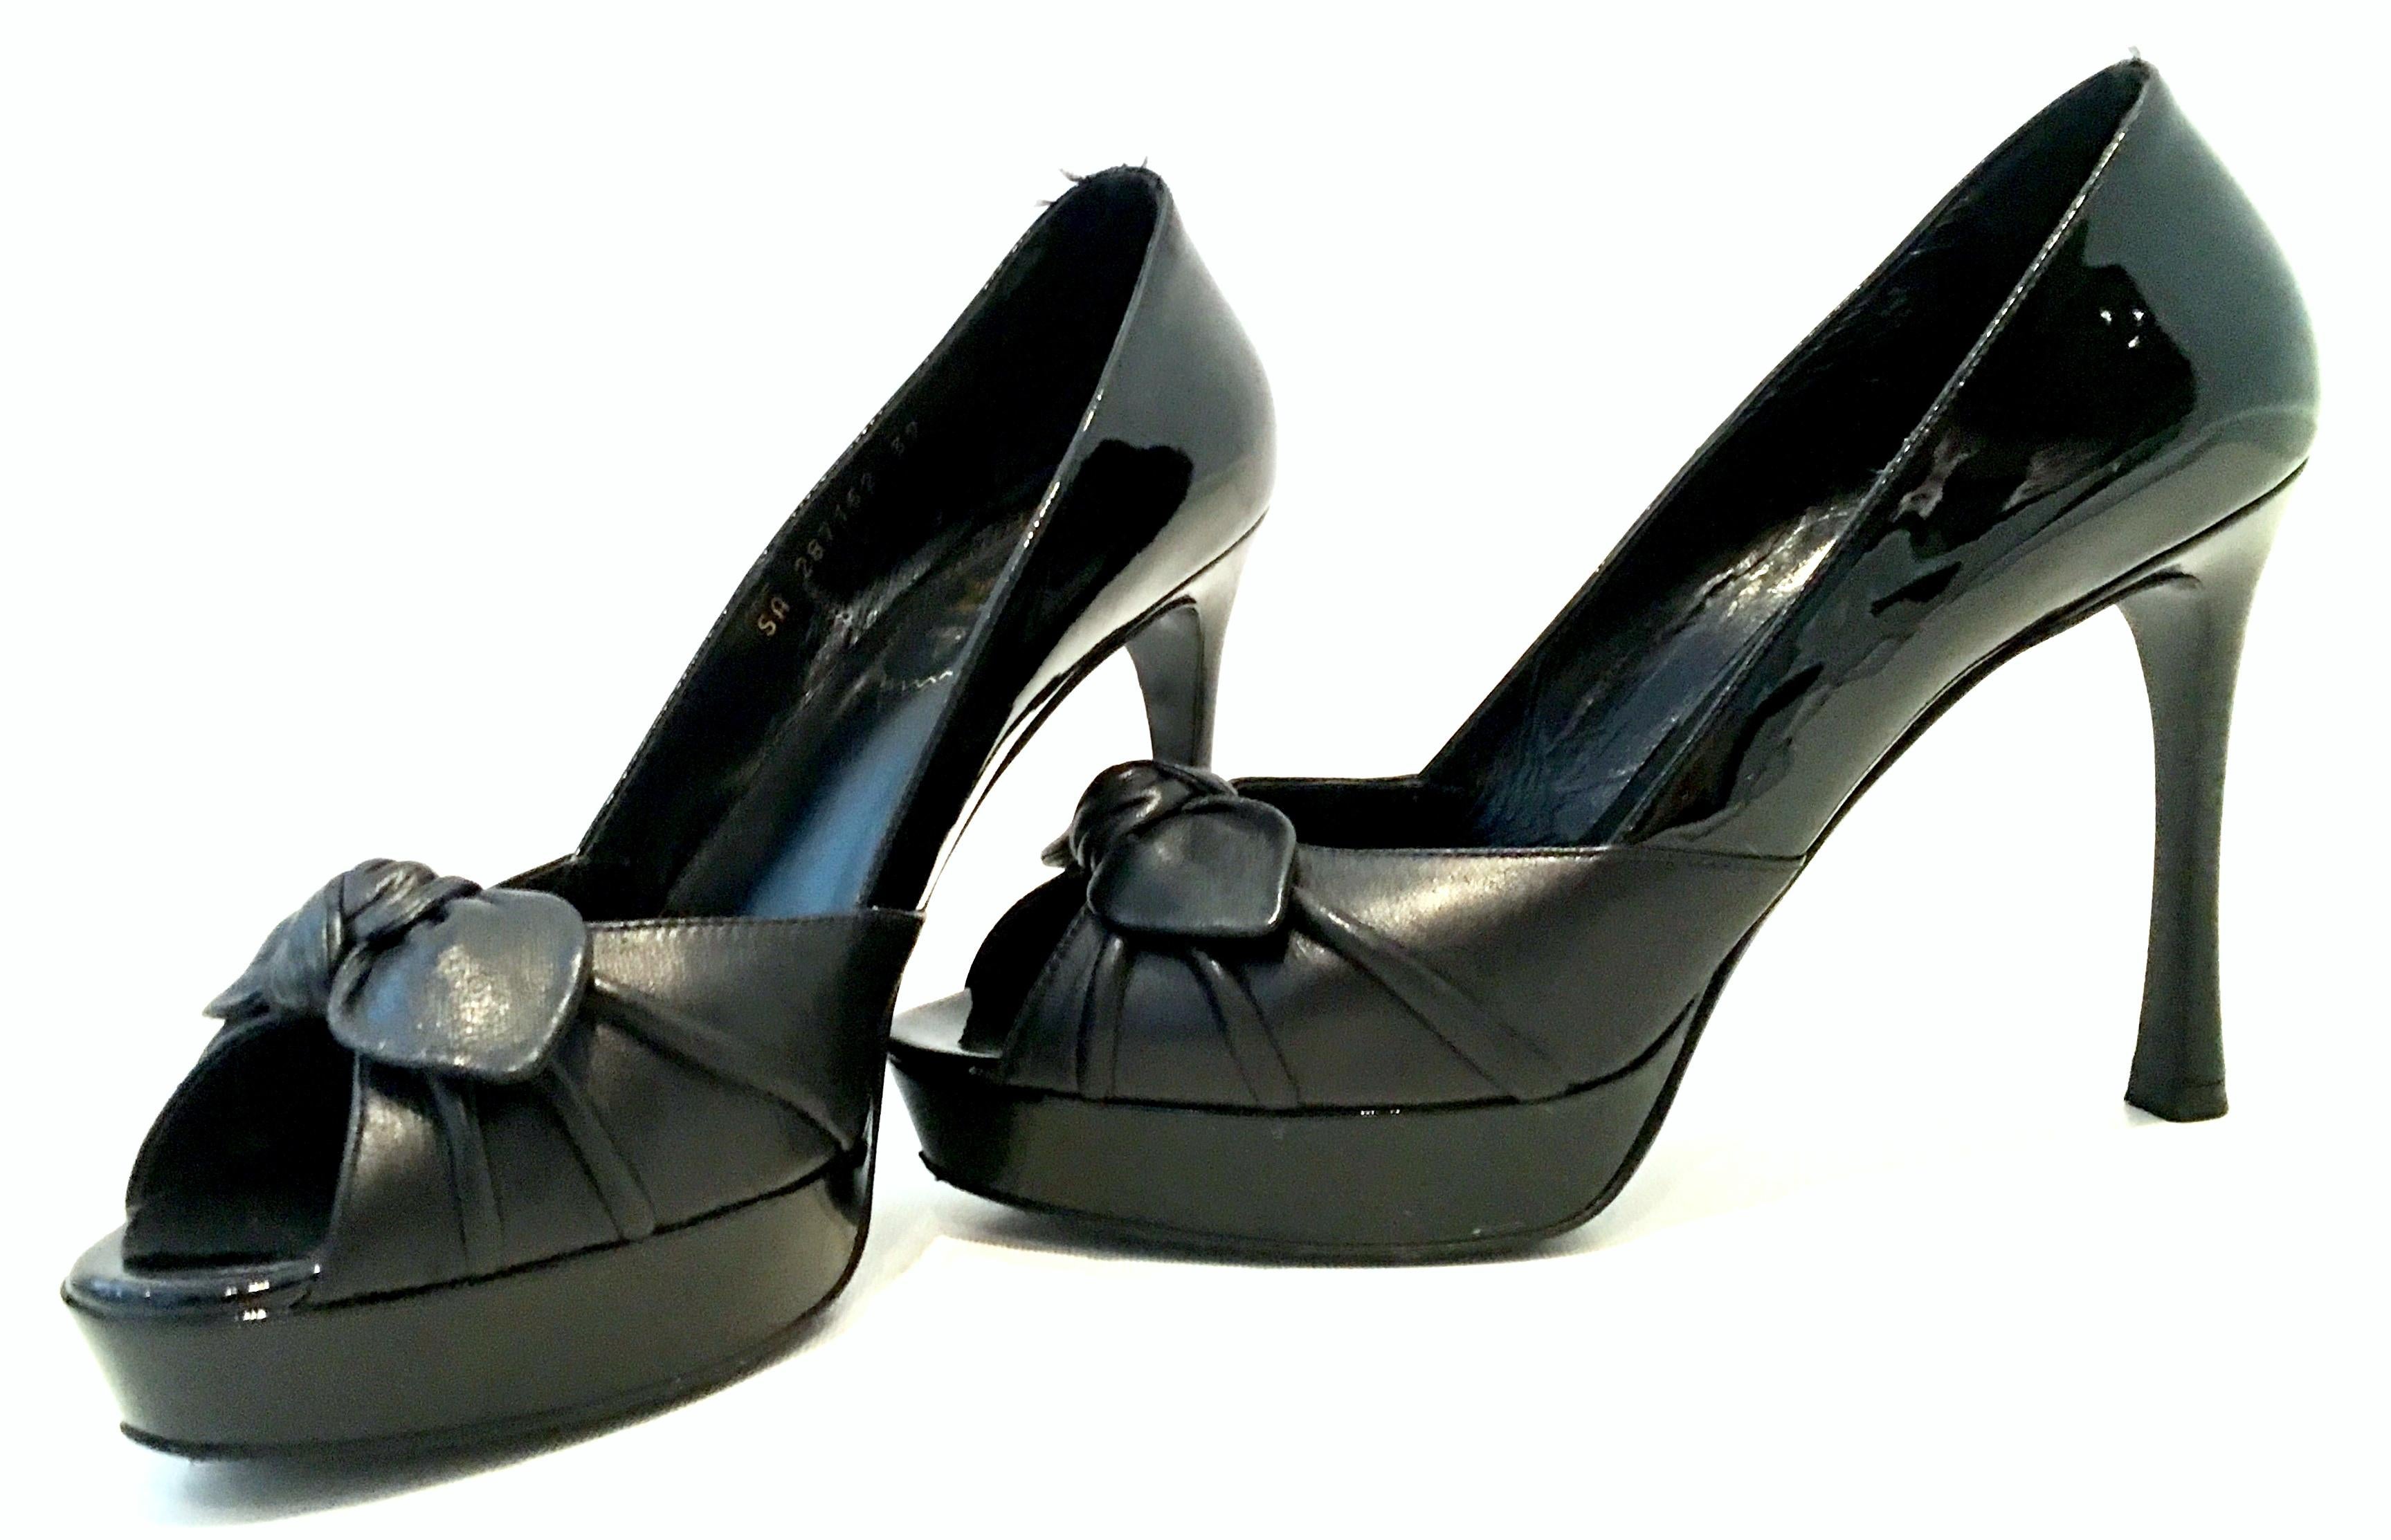 21st Century Yves Saint Laurent-Rive Gauche (YSL) Paris Black Peep Toe Platform Shoes-Size 39. These like new platform stiletto shoes feature a combination of black leather and black patent leather, with a bow detail at the toe. Signed on the